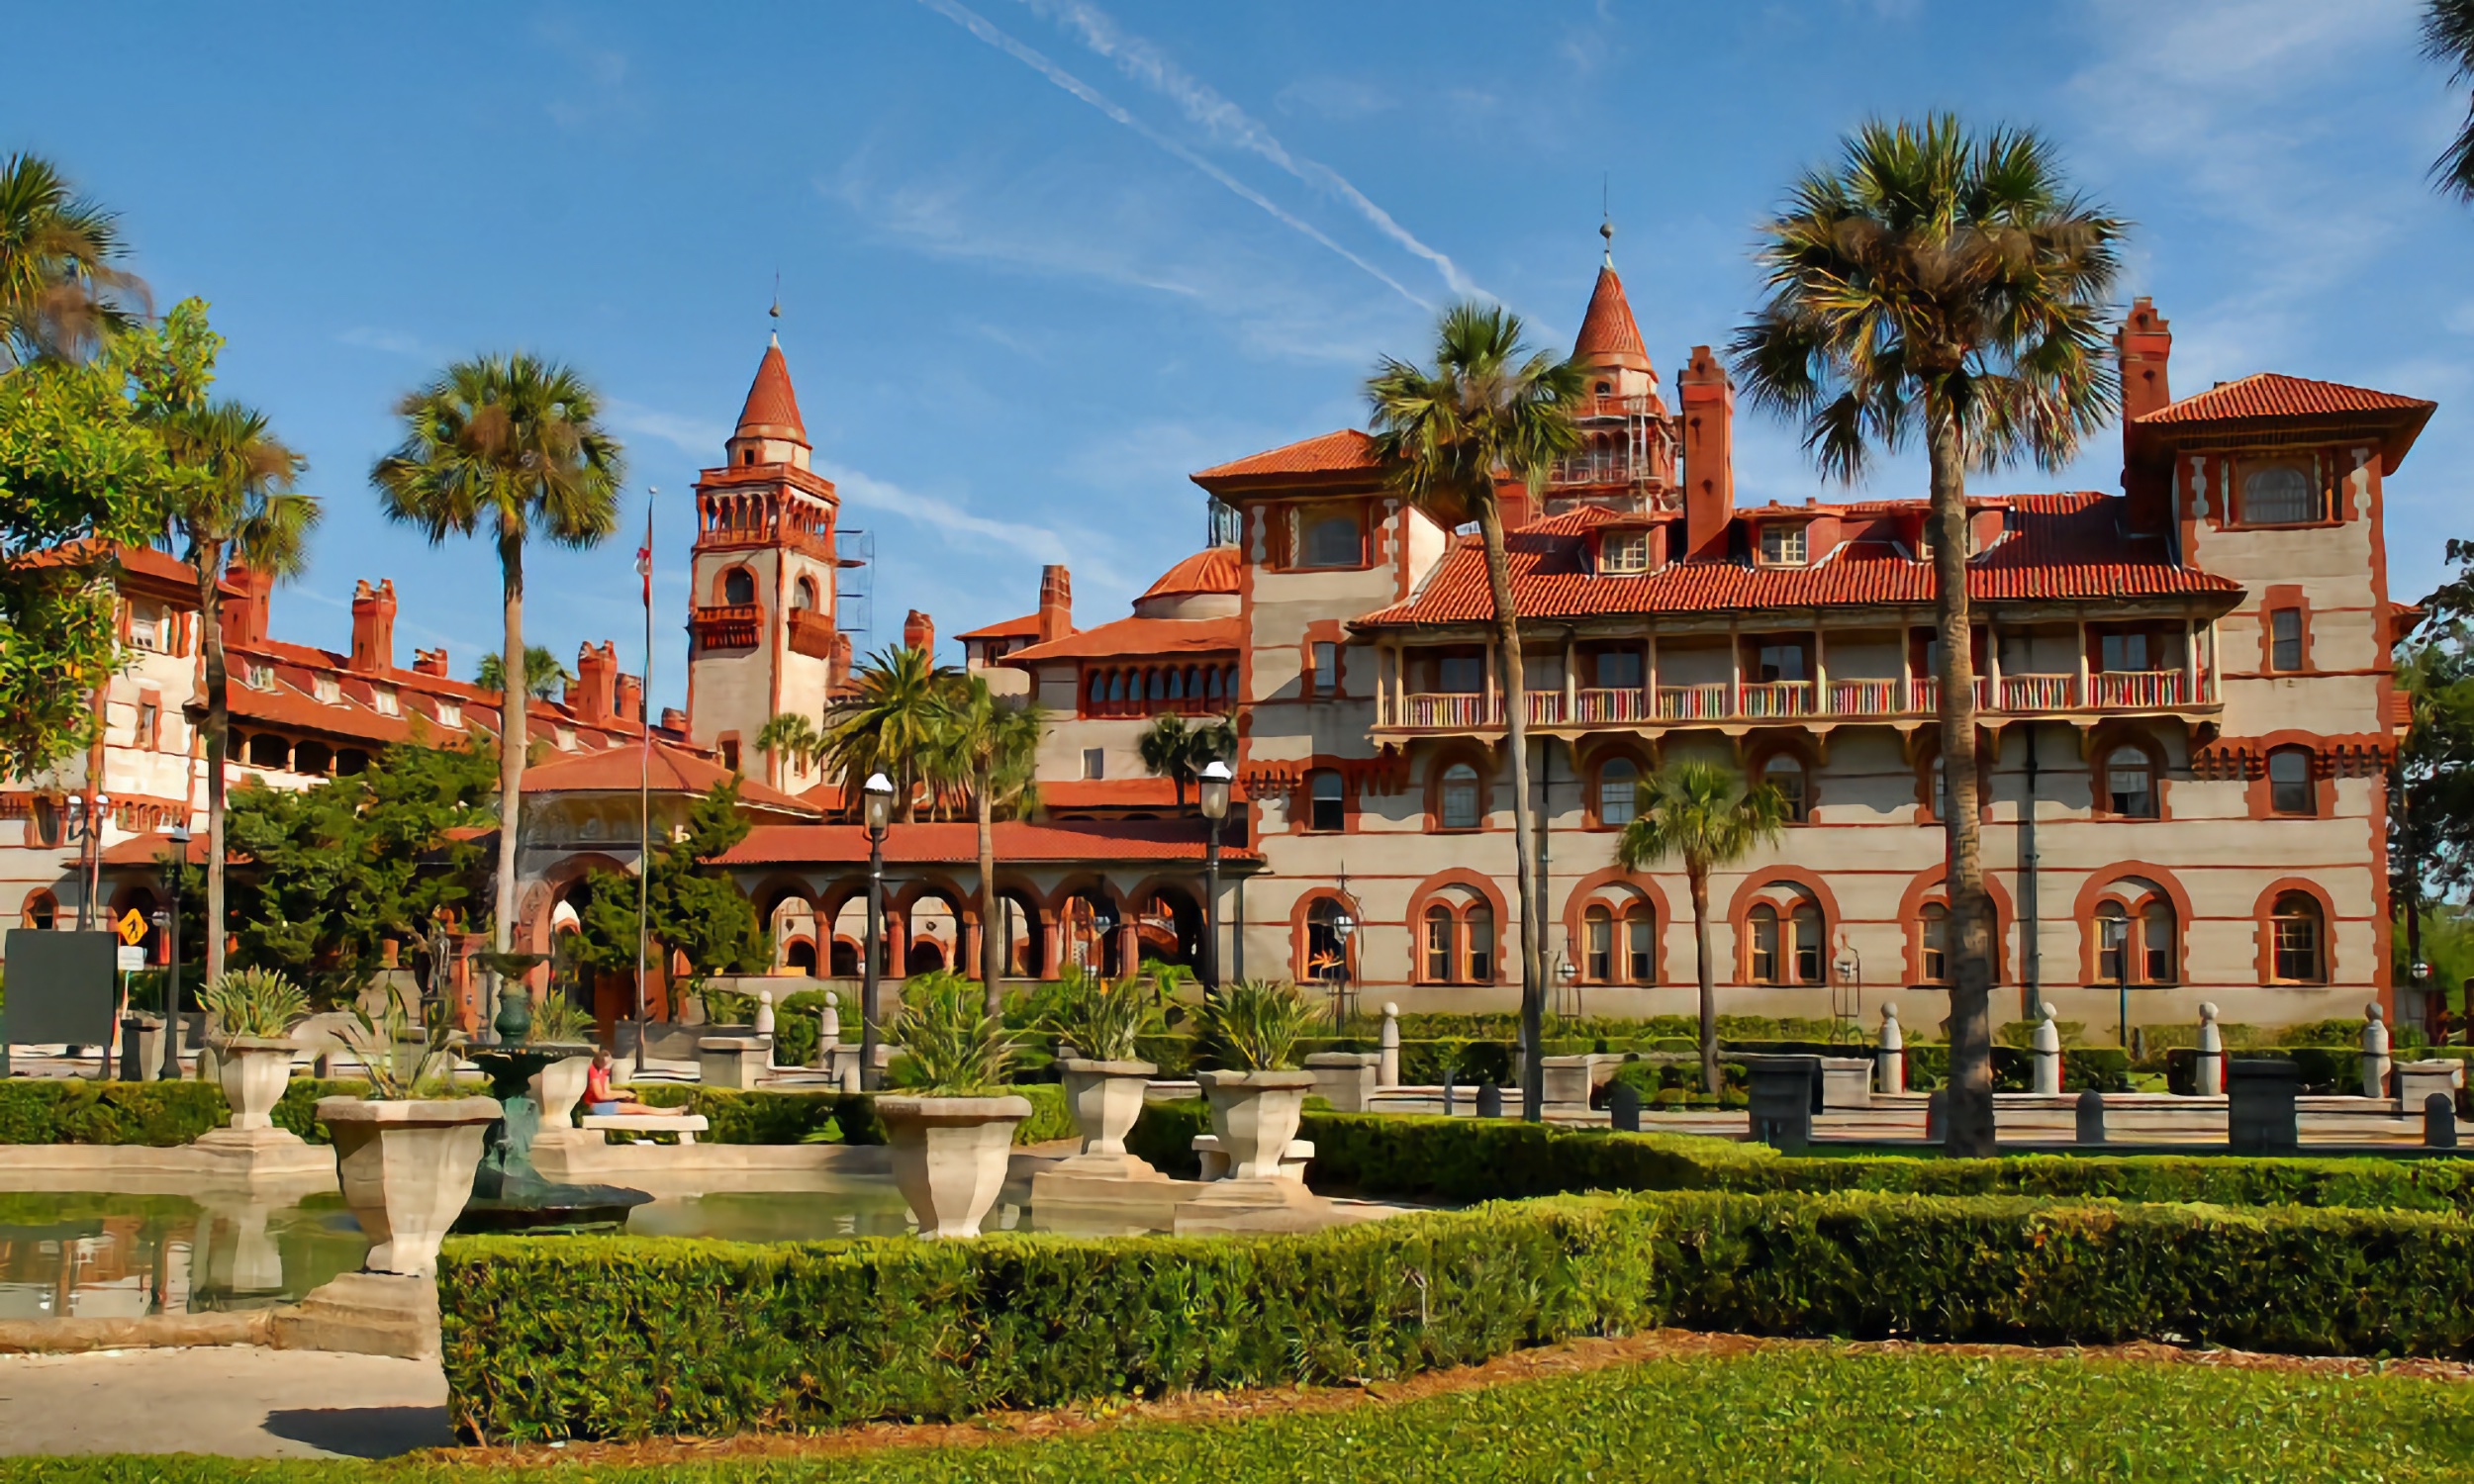 The exterior view of Flagler College / Ponce de Leon Hotel